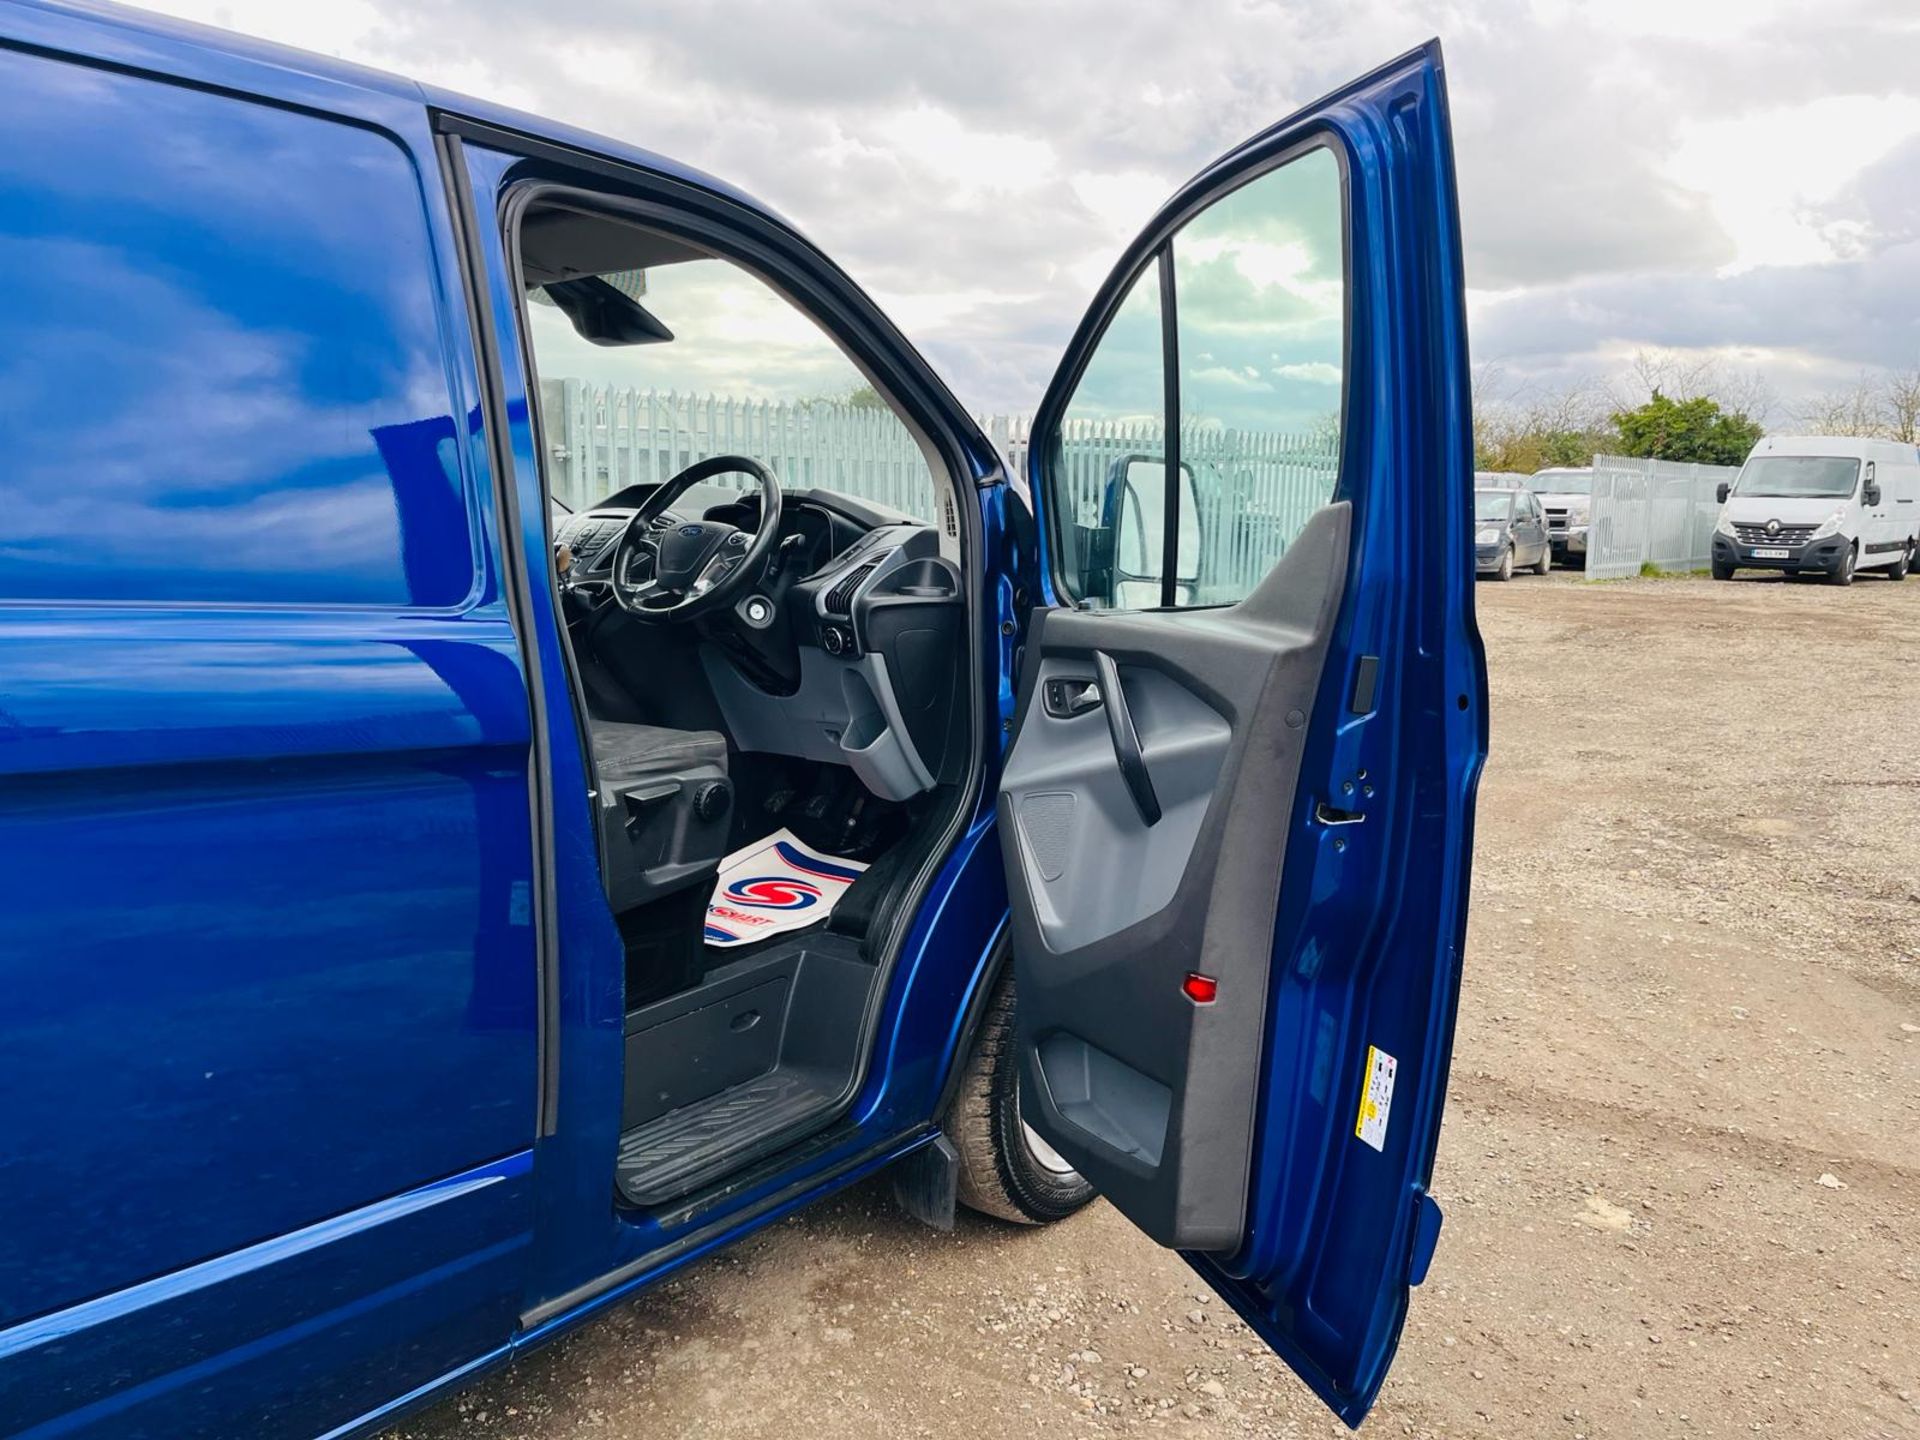 ** ON SALE ** Ford Transit Custom Limited 130 290 L3 H1 2.0 TDCI - ULEZ Compliant -Air Conditioning - Image 15 of 28